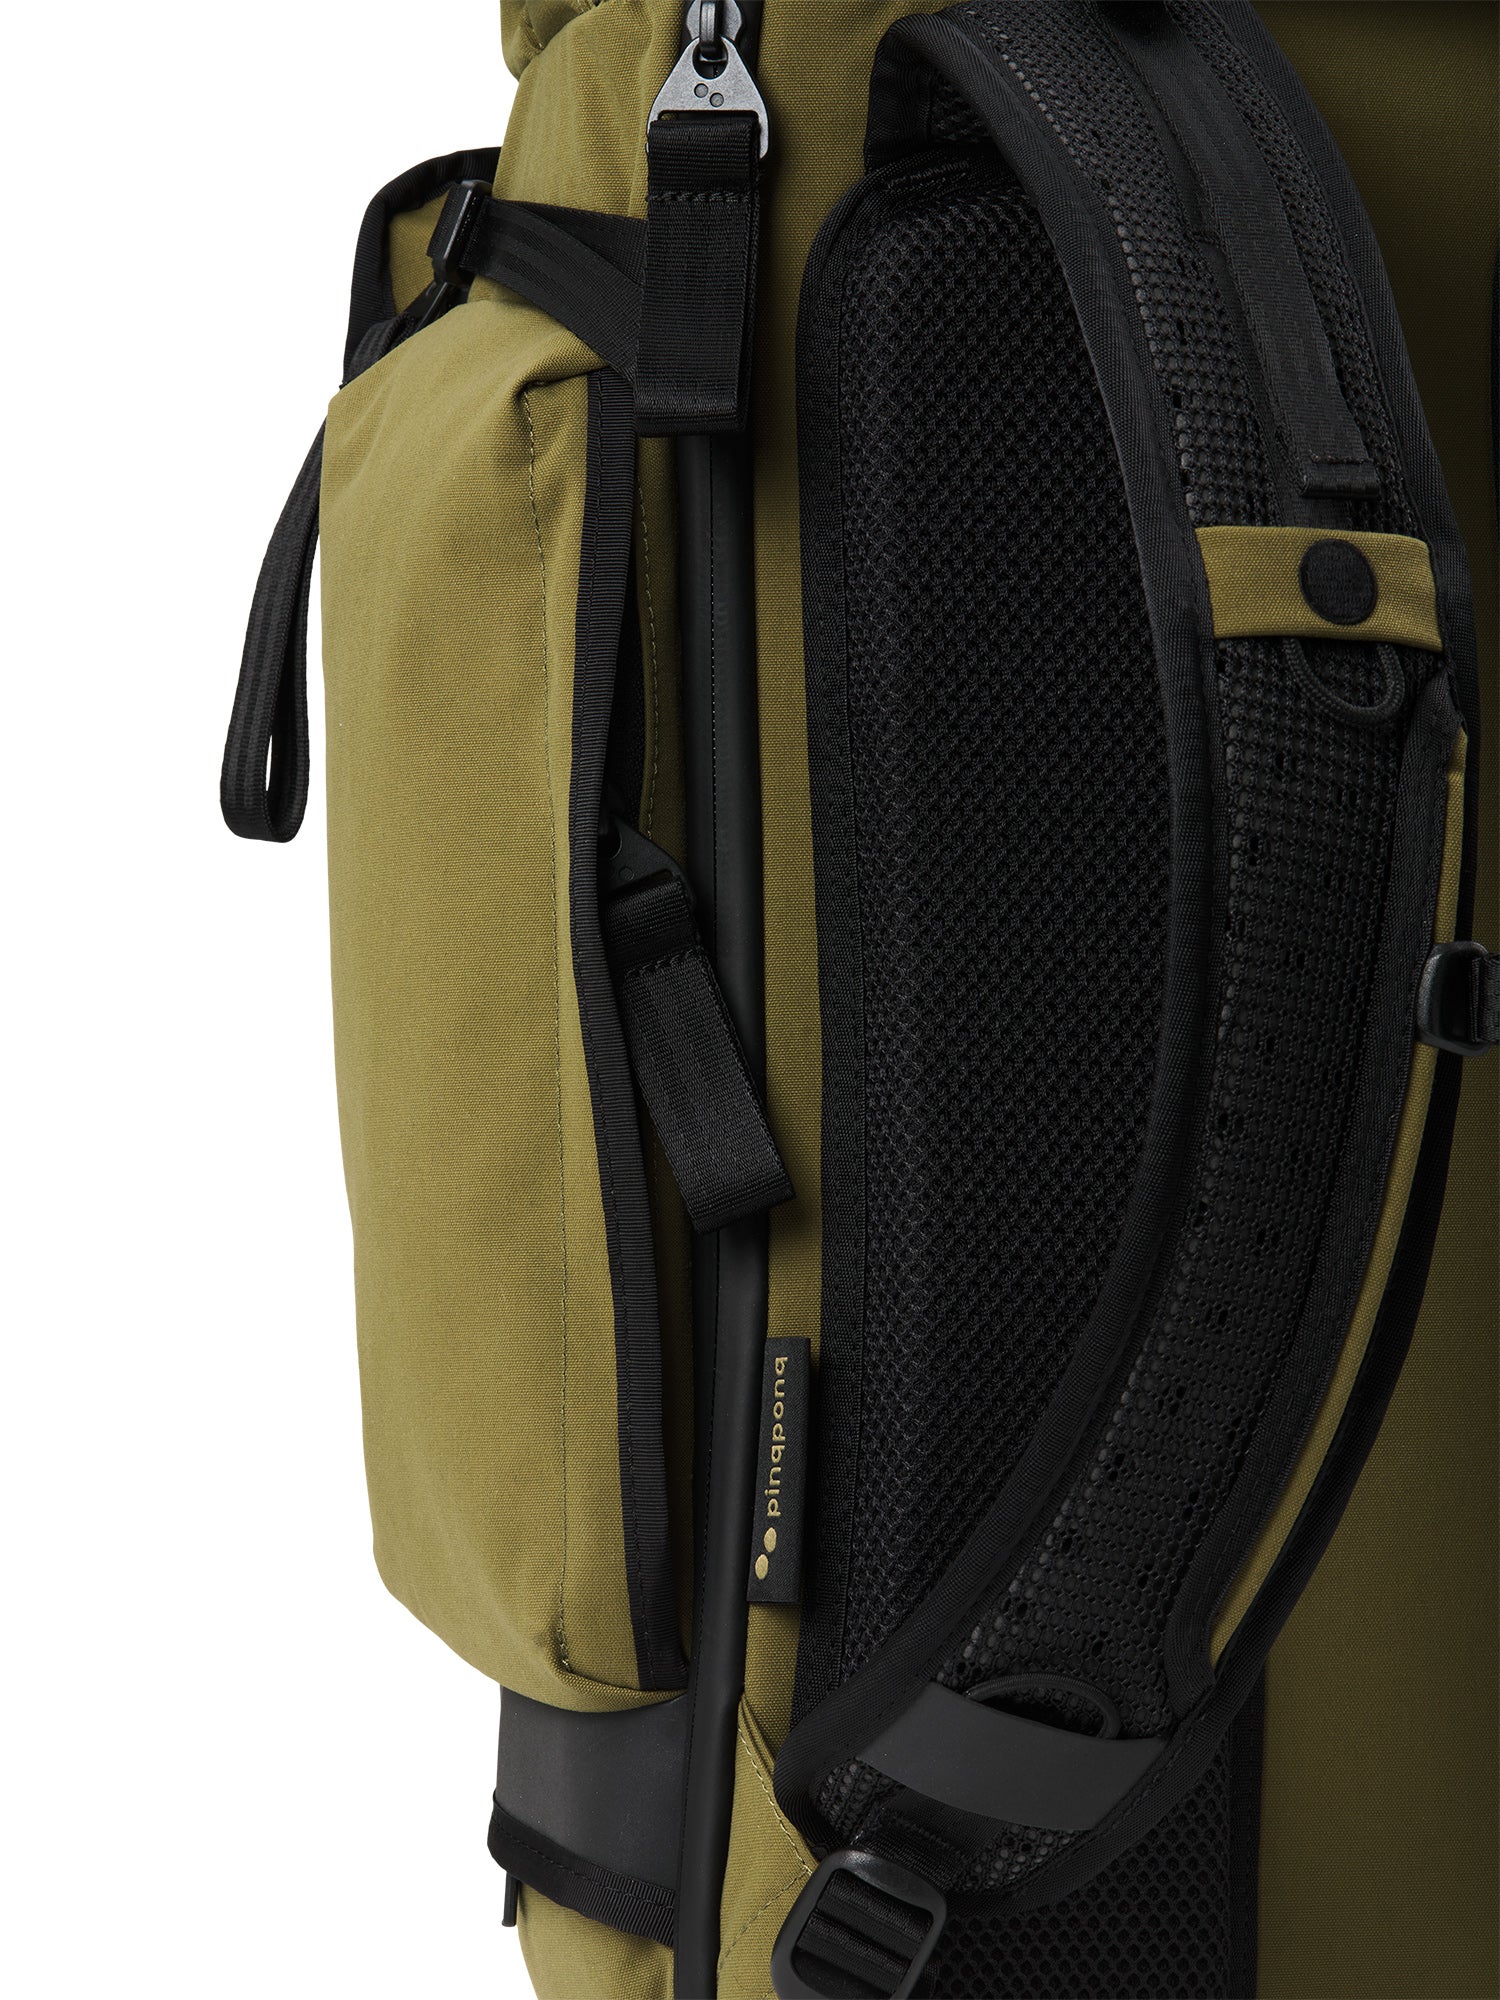 Komut Medium - Your ideal backpack for commuting and traveling